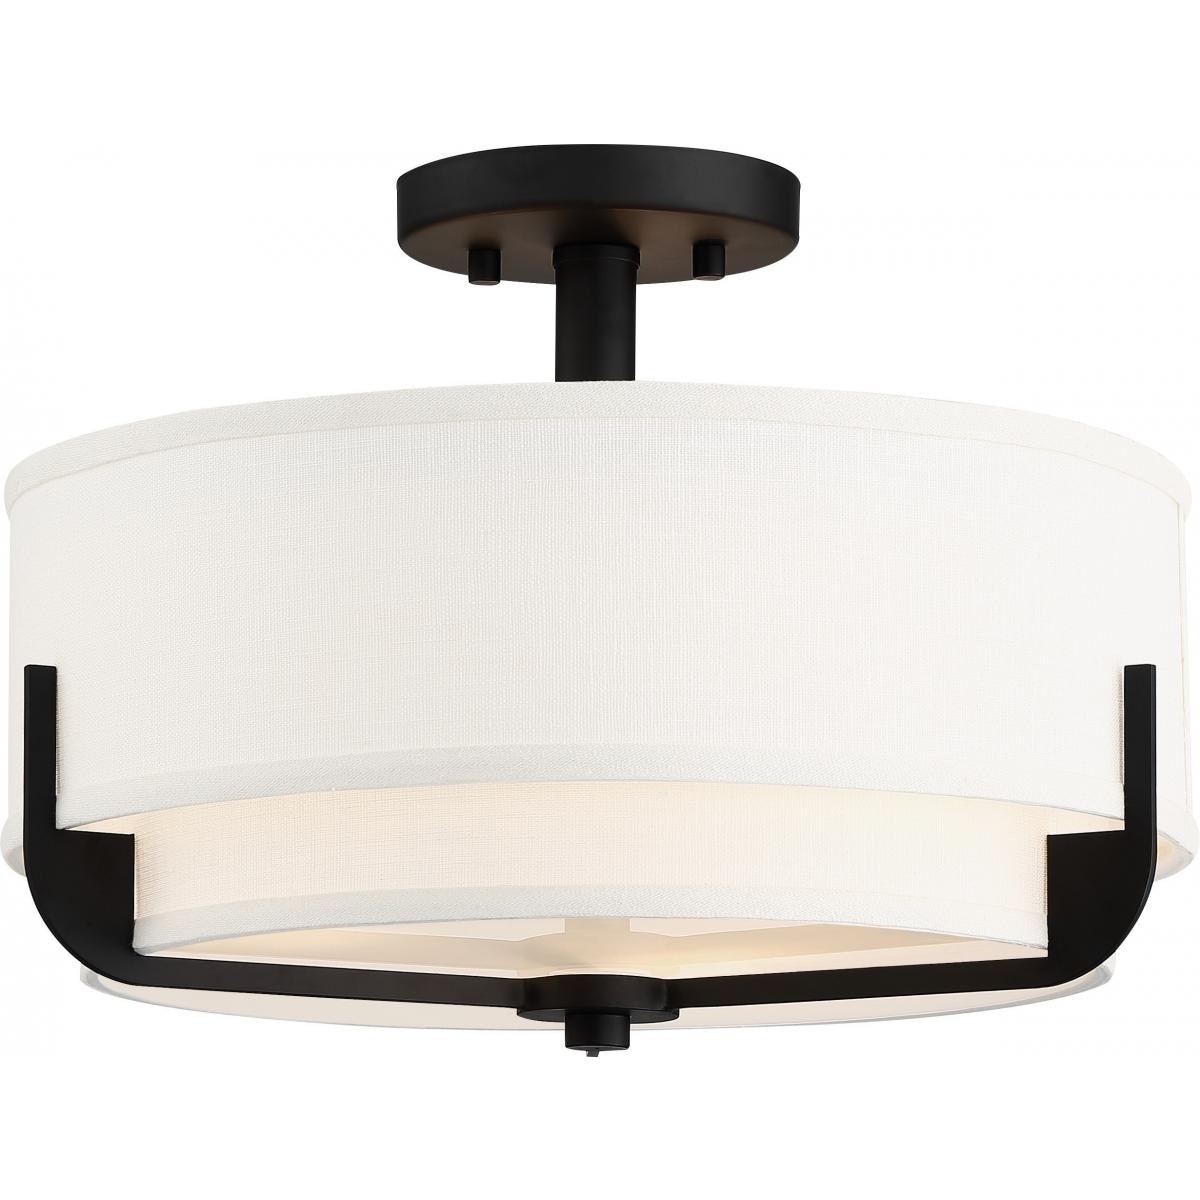 1 to 3 Nuvo Lighting Semi-Flush Mount Ceiling Lights - Bed Bath